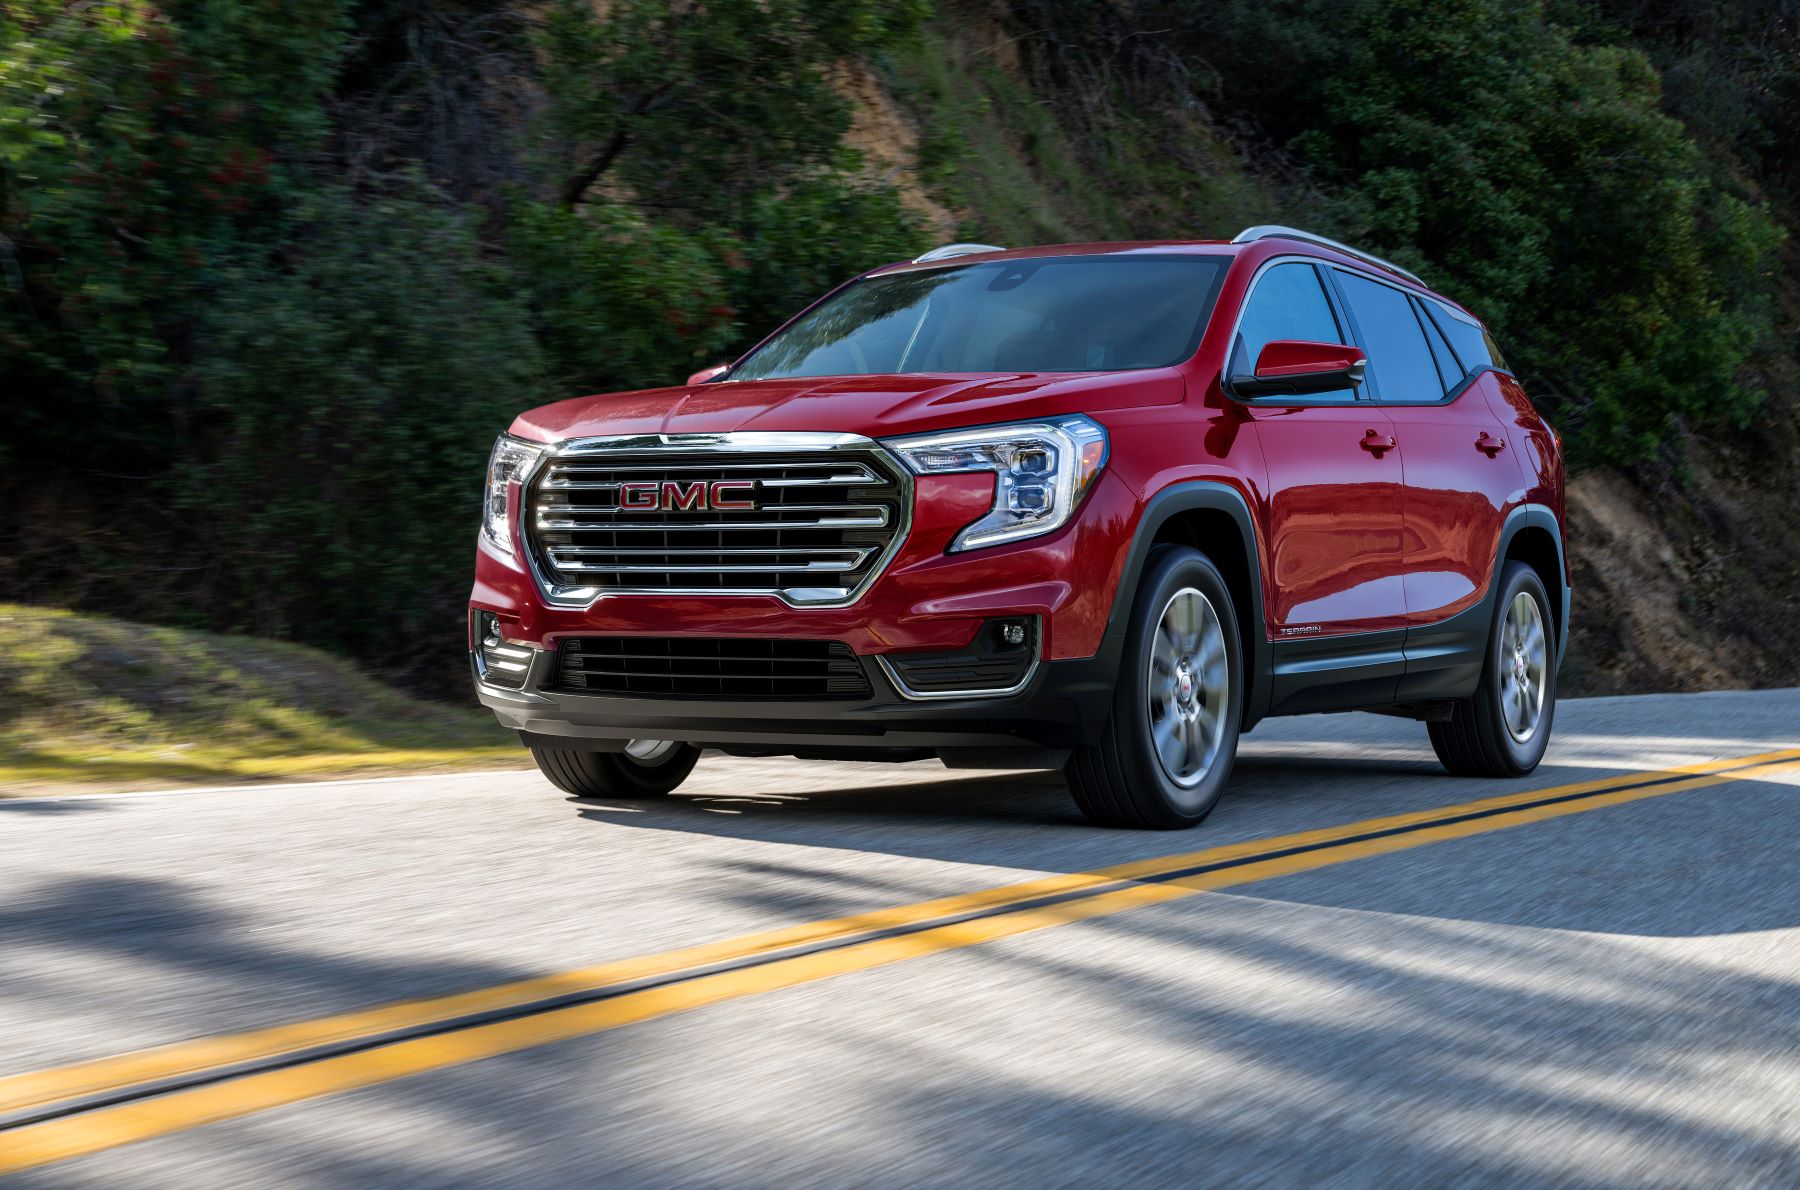 2022 GMC Terrain SLT compact SUV in red driving on a strip of highway